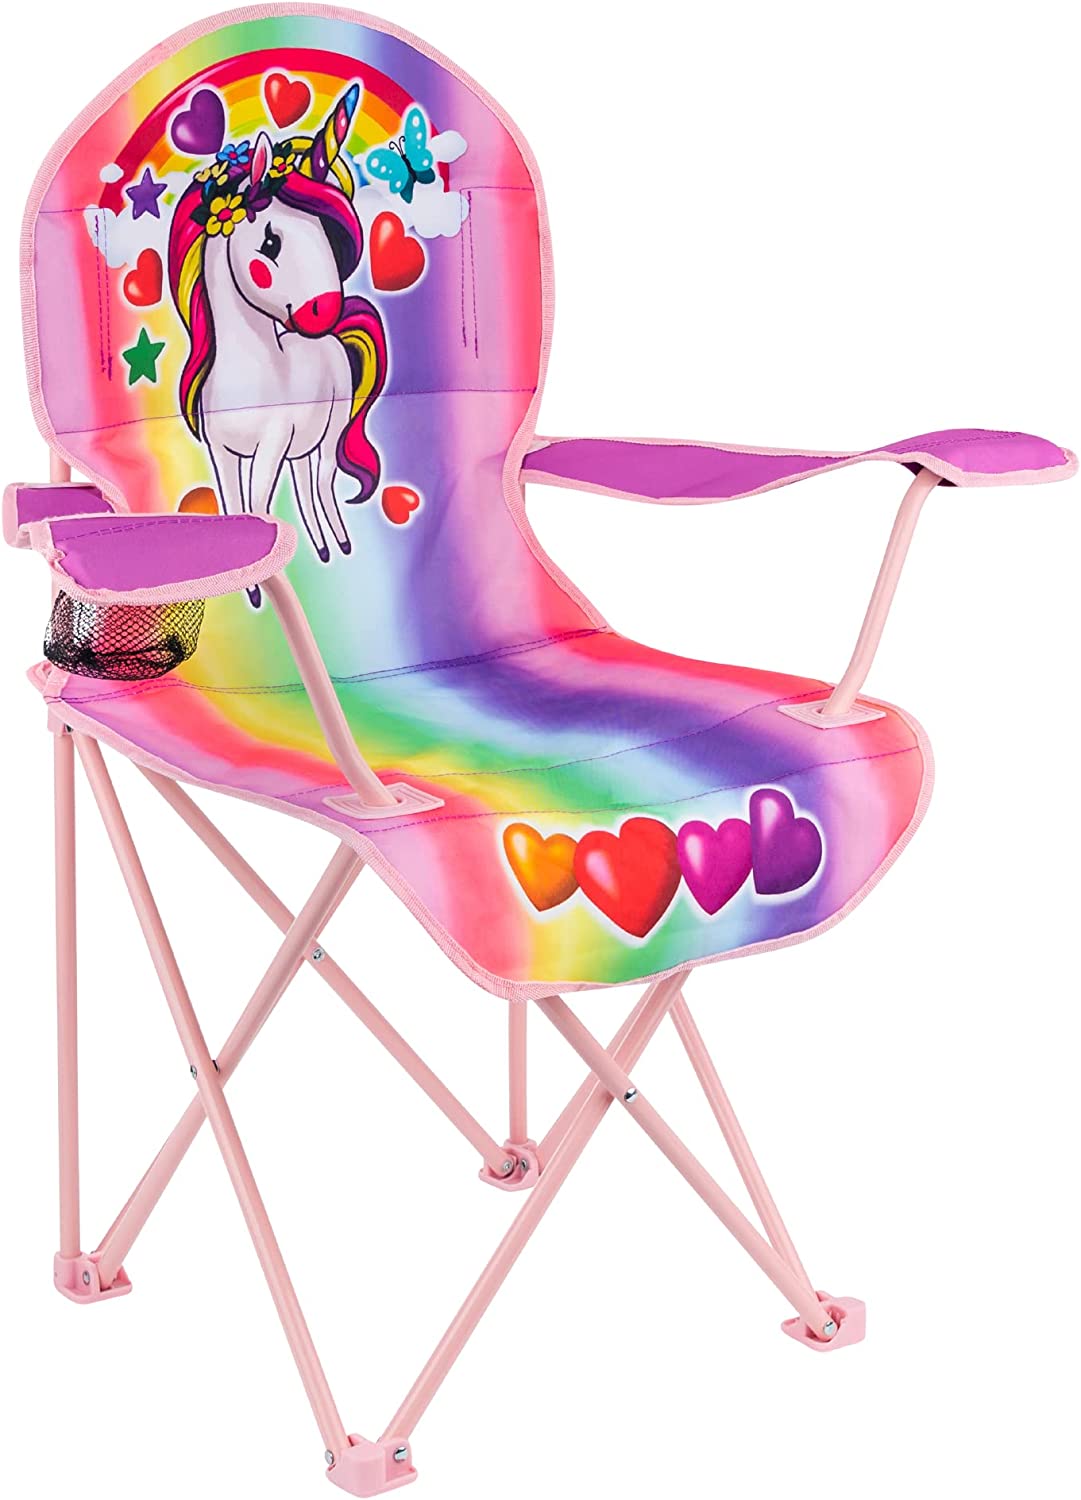 Toy To Enjoy Outdoor Unicorn Chair for Kids Foldable Children’s Chair for Camping, Tailgates, Beach, Fishing, – Portable Carrying Bag Included Mesh Cup Holder & Sturdy Construction. Available Ages 2-5 or 5 to 10